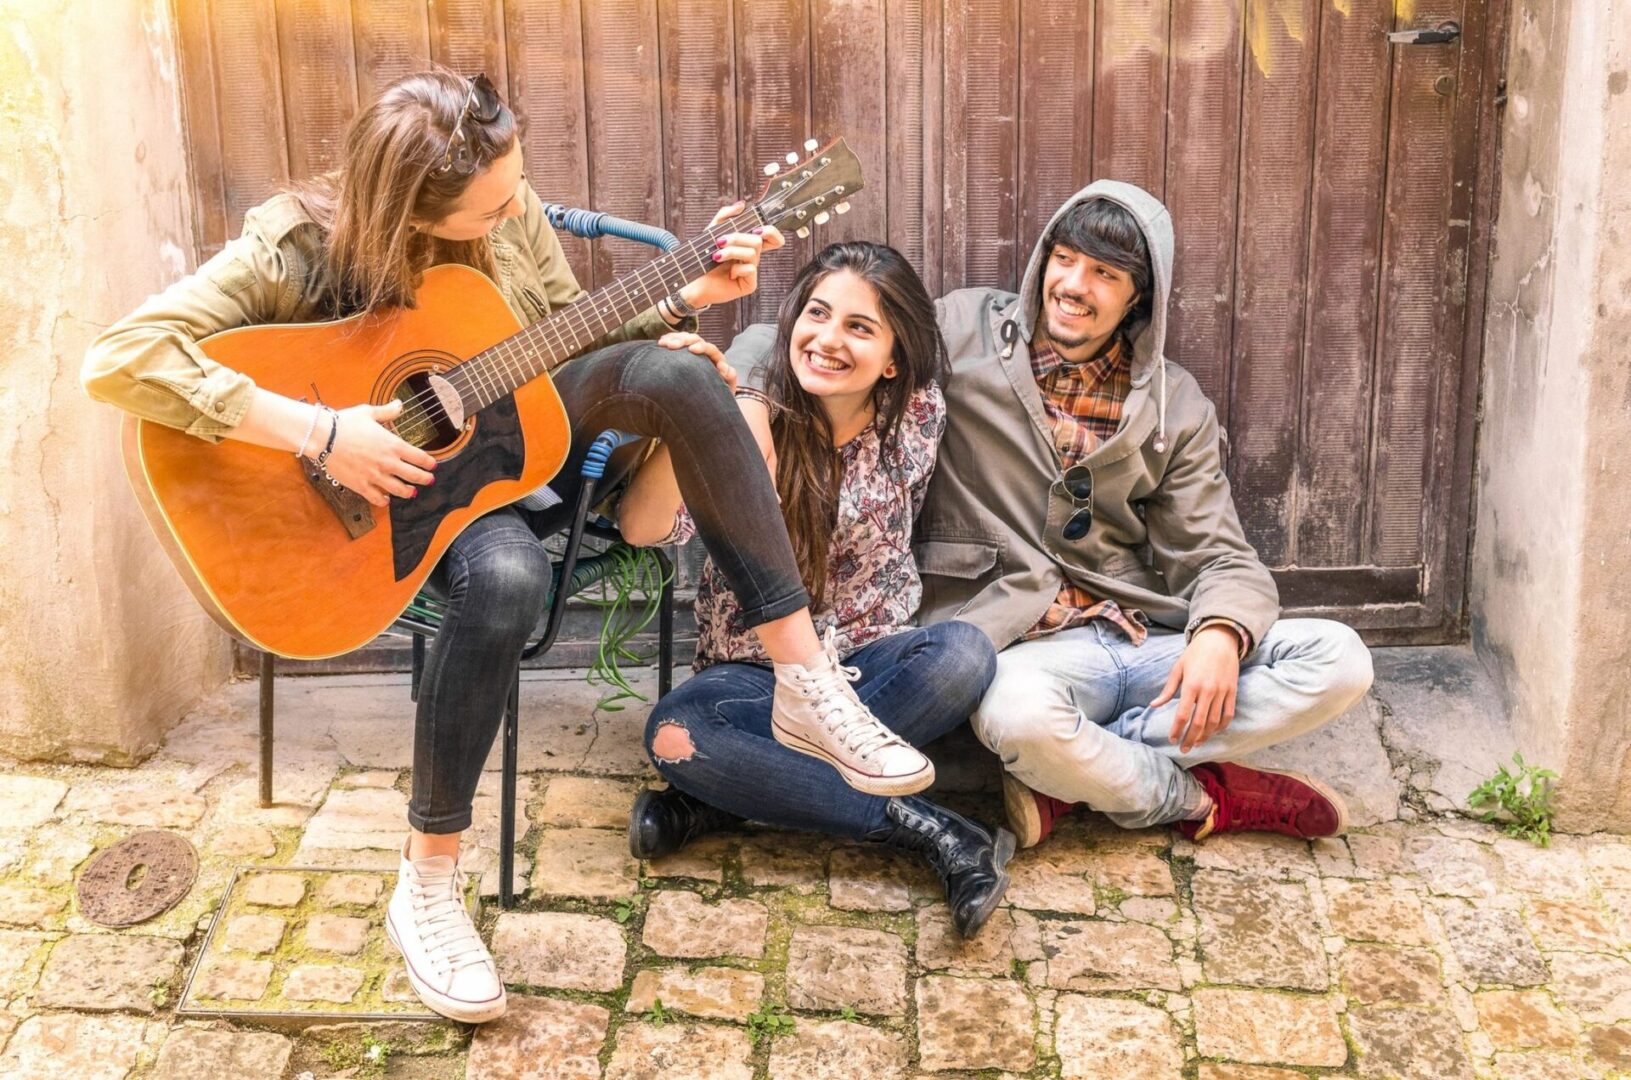 Three people sitting on a brick floor with one playing the guitar